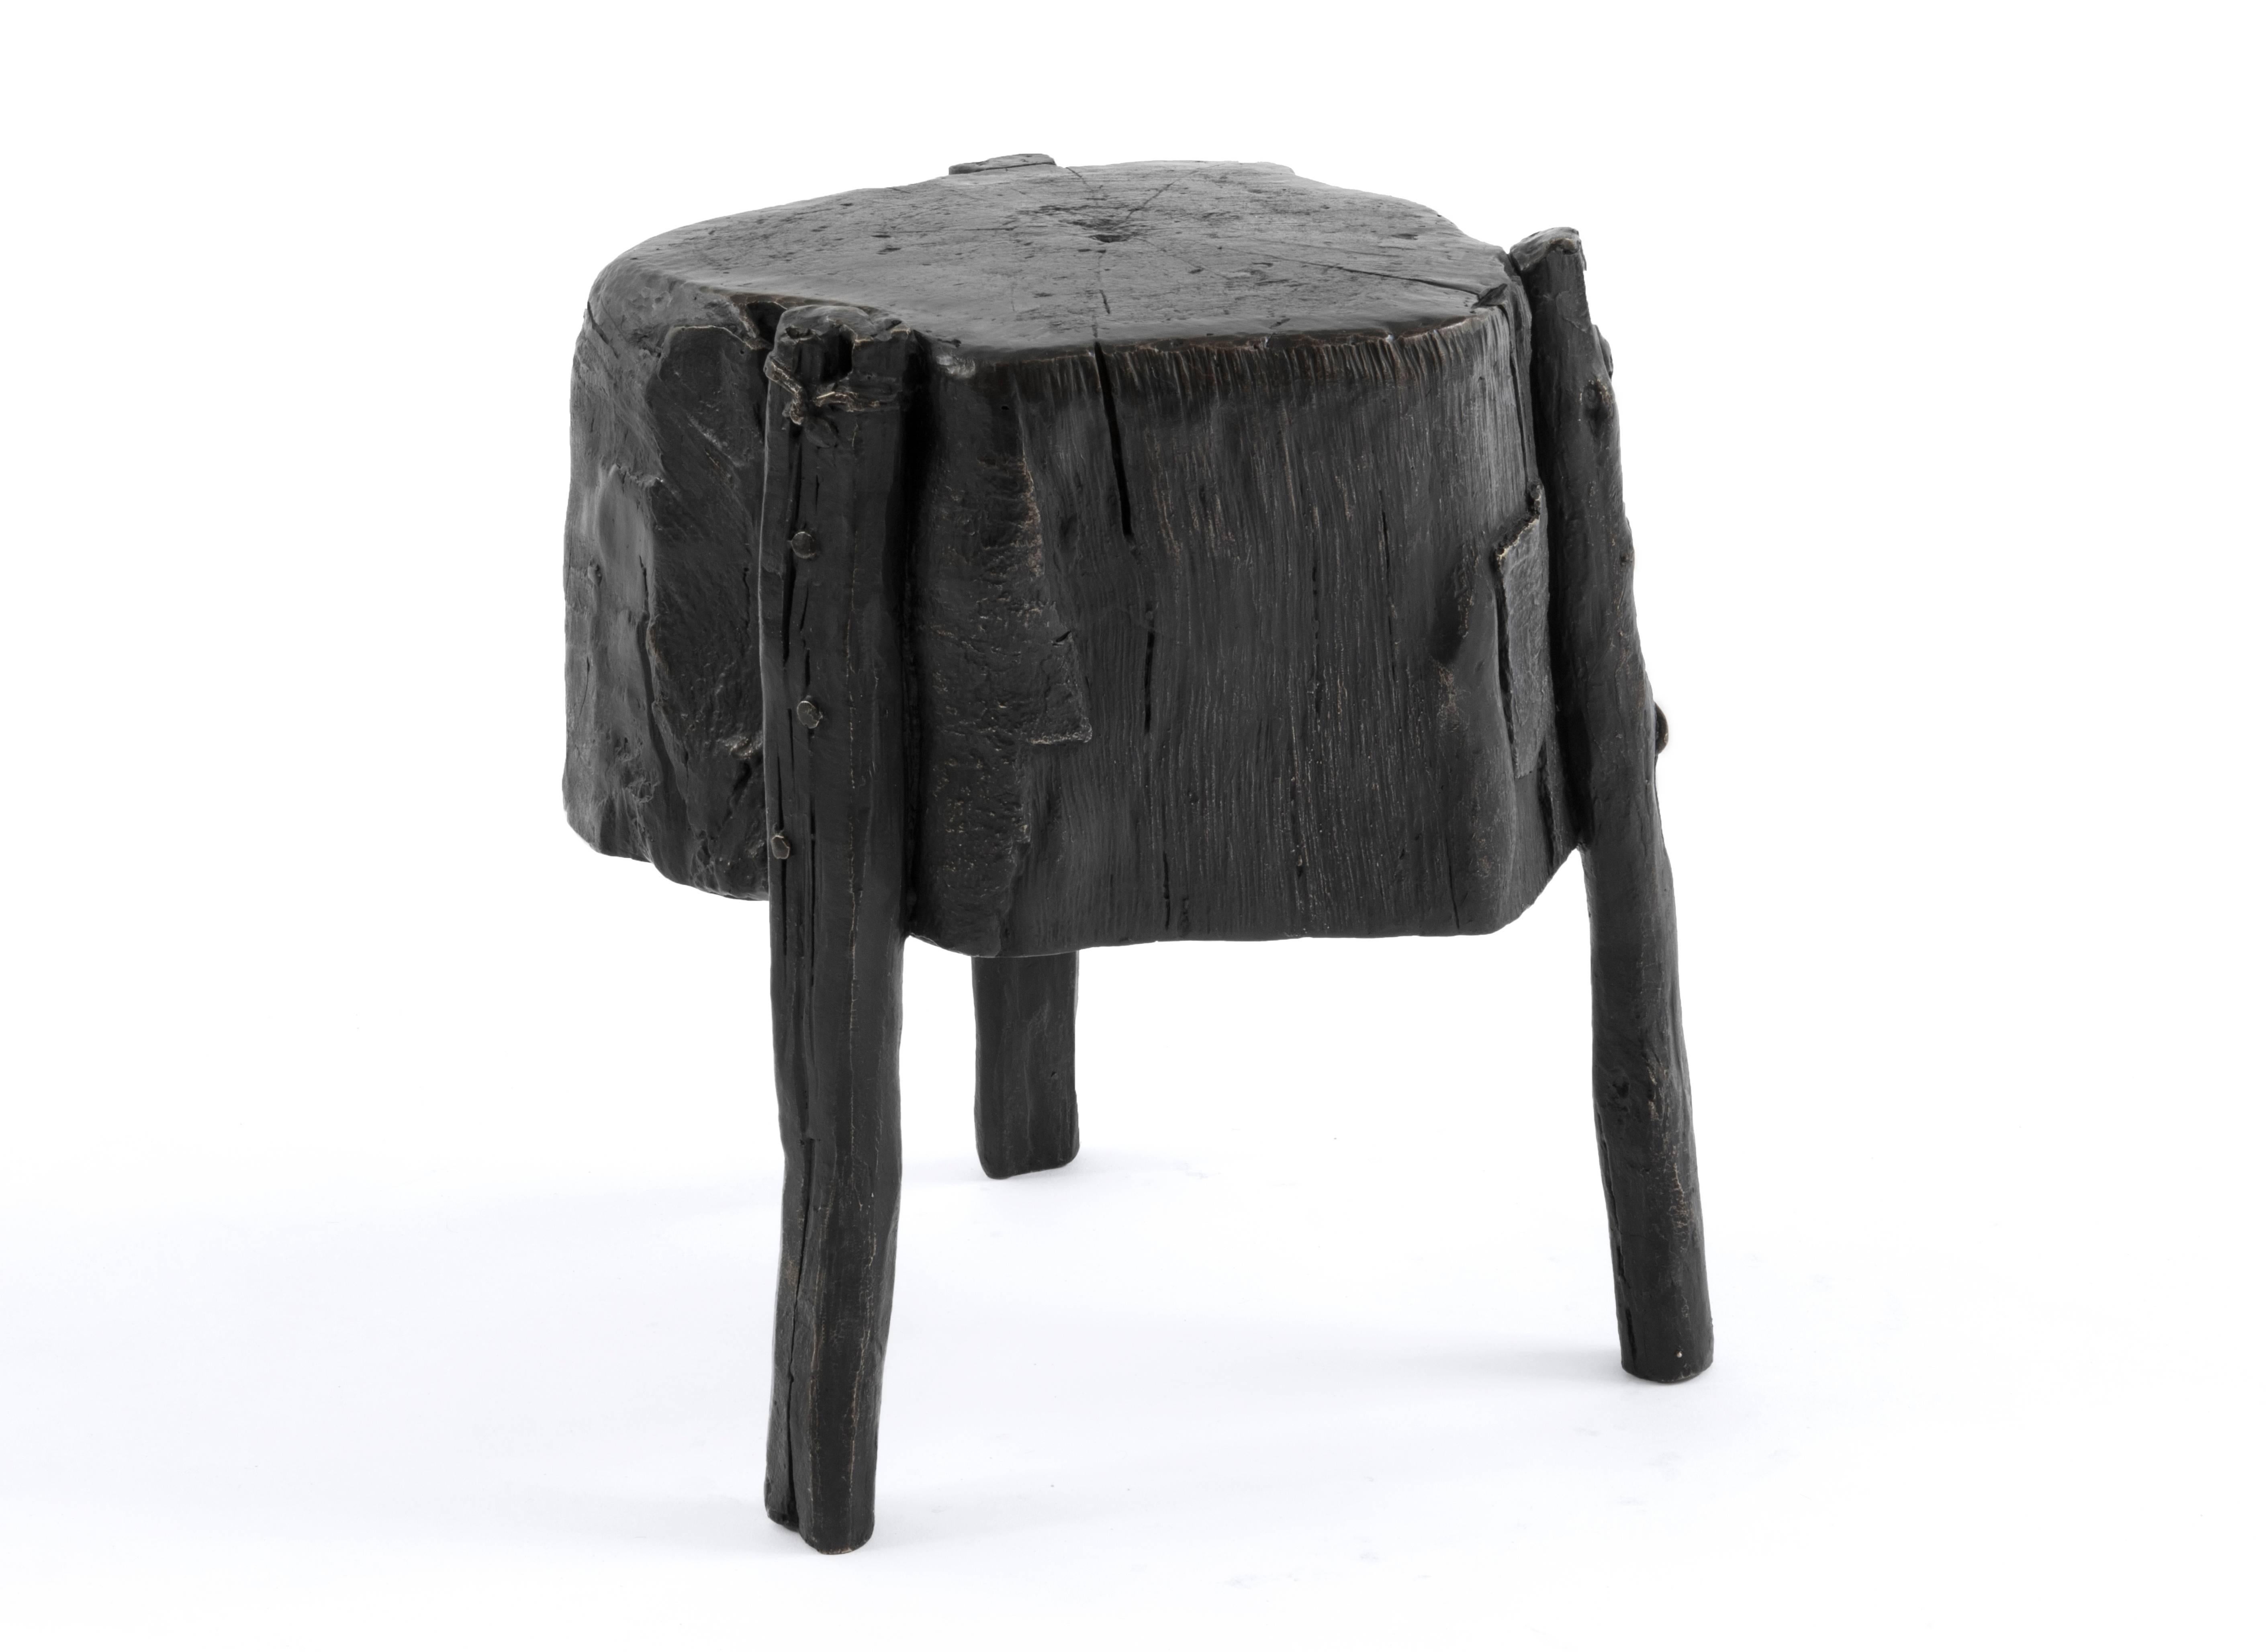 Mexican S.R.O Memoria Stool #1 by Ewe Studio For Sale